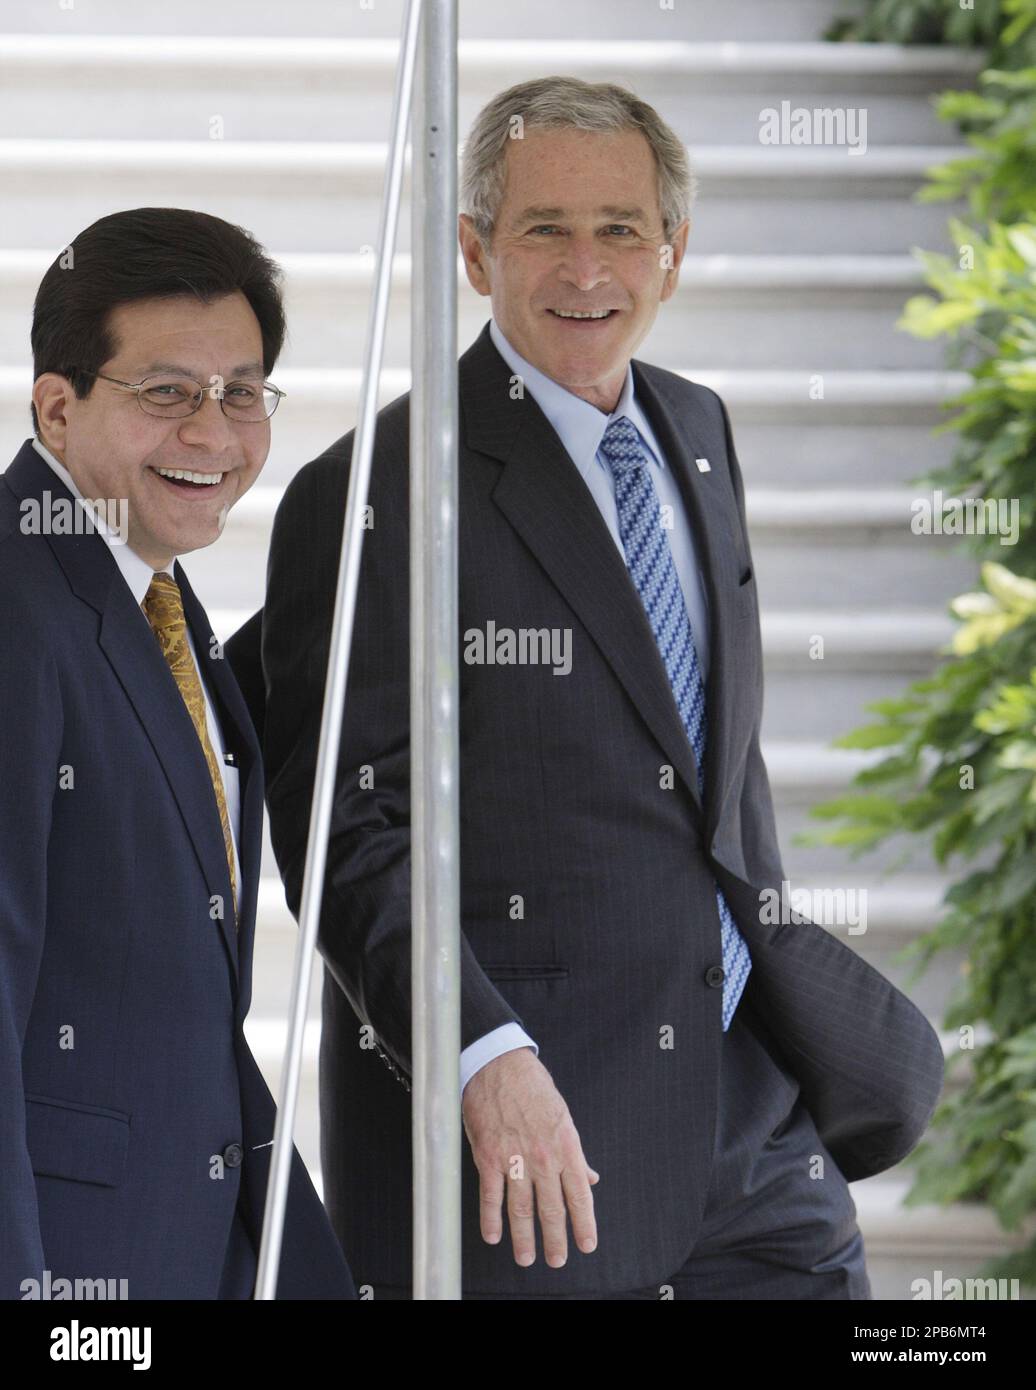 **FILE** President Bush, right, walks with Attorney General Alberto Gonzales outside of the White House in Washington in this Thursday, Aug. 9, 2007 file photo. Bush administration officials say Gonzales will announce his resignation Monday, Aug. 27, 2007. (AP Photo/Ron Edmonds, FILE) Stock Photo